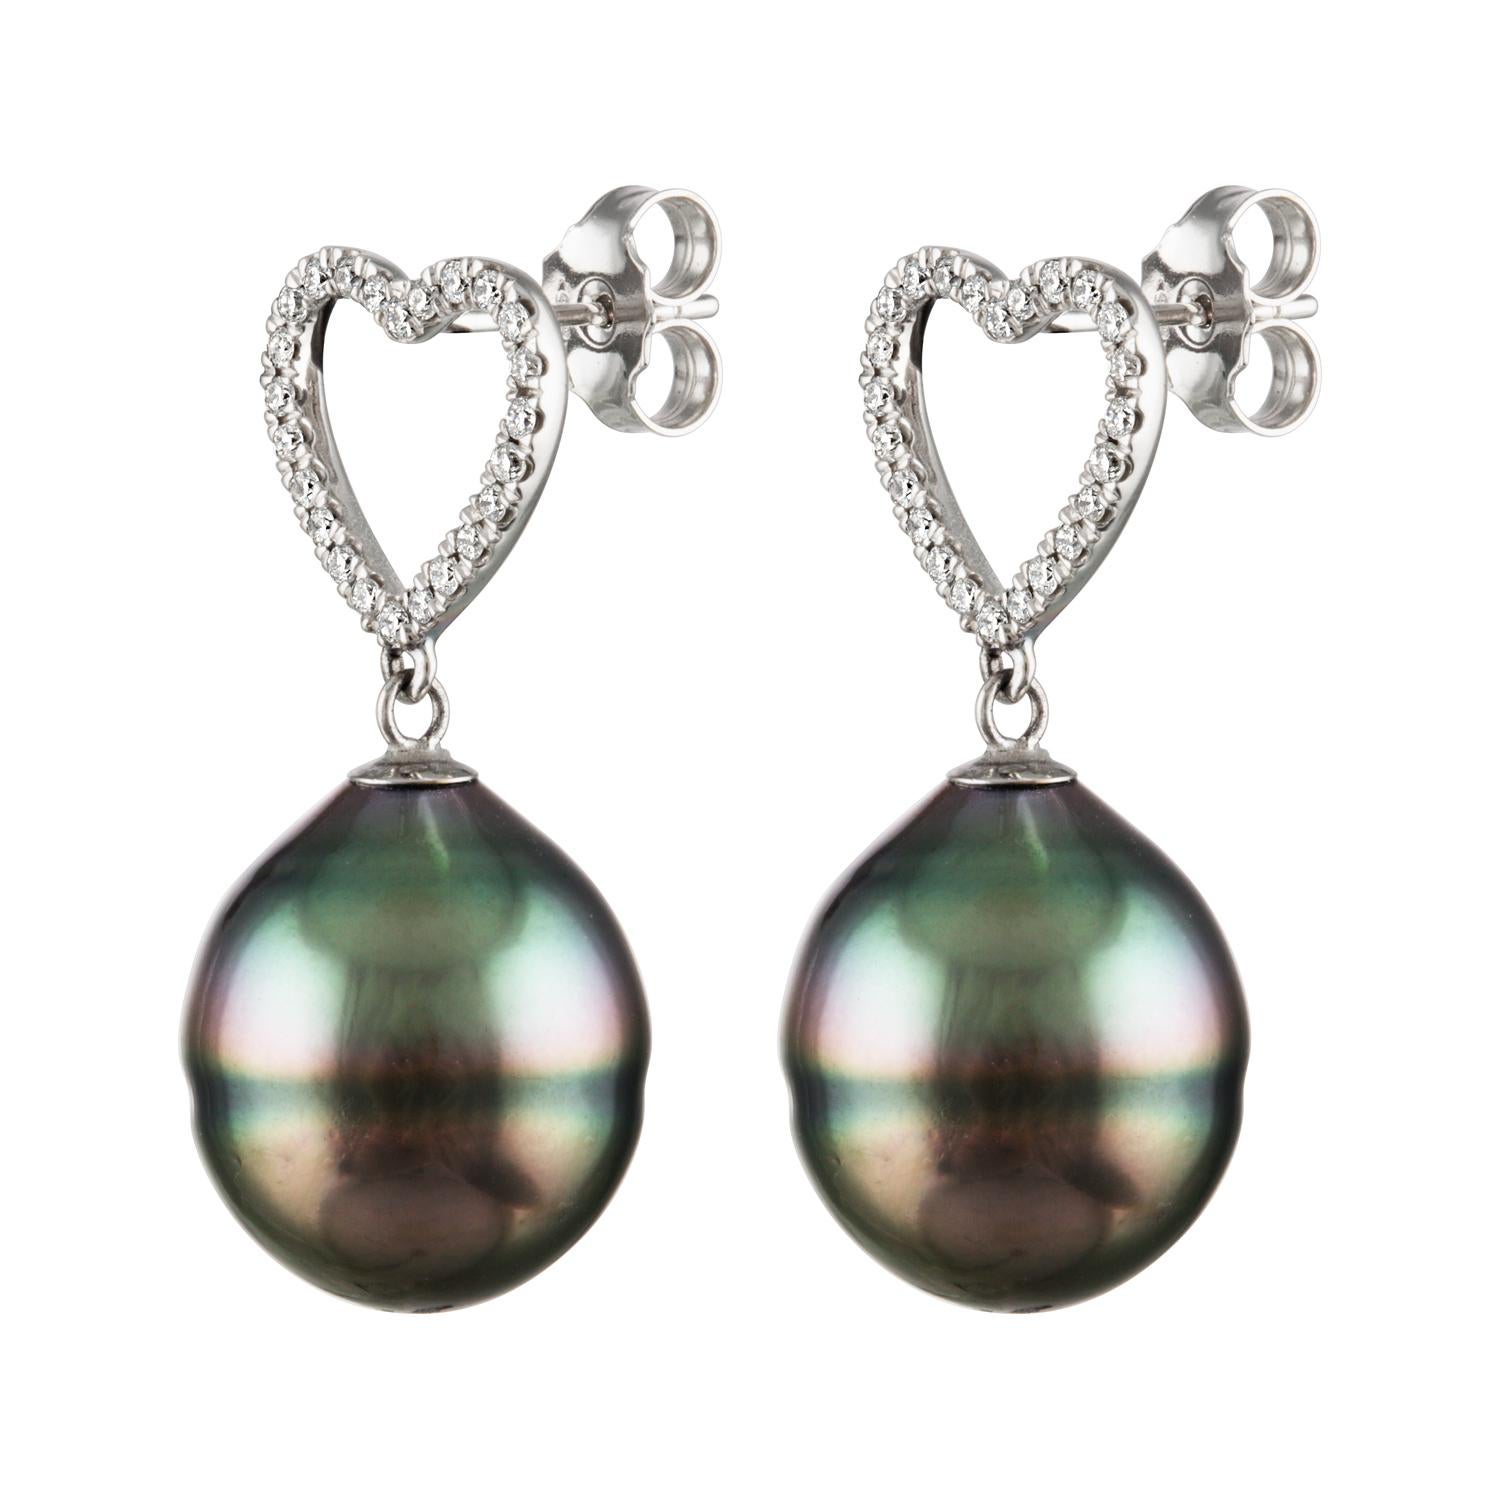 These earrings feature beautiful South Sea Tahitian baroque cultured pearls set on 14K white gold. 
These Tahitian pearls from French Polynesia measure 13.8x16mm and hang from White Gold heart shapes set with 0.36 carats of diamonds total.
These